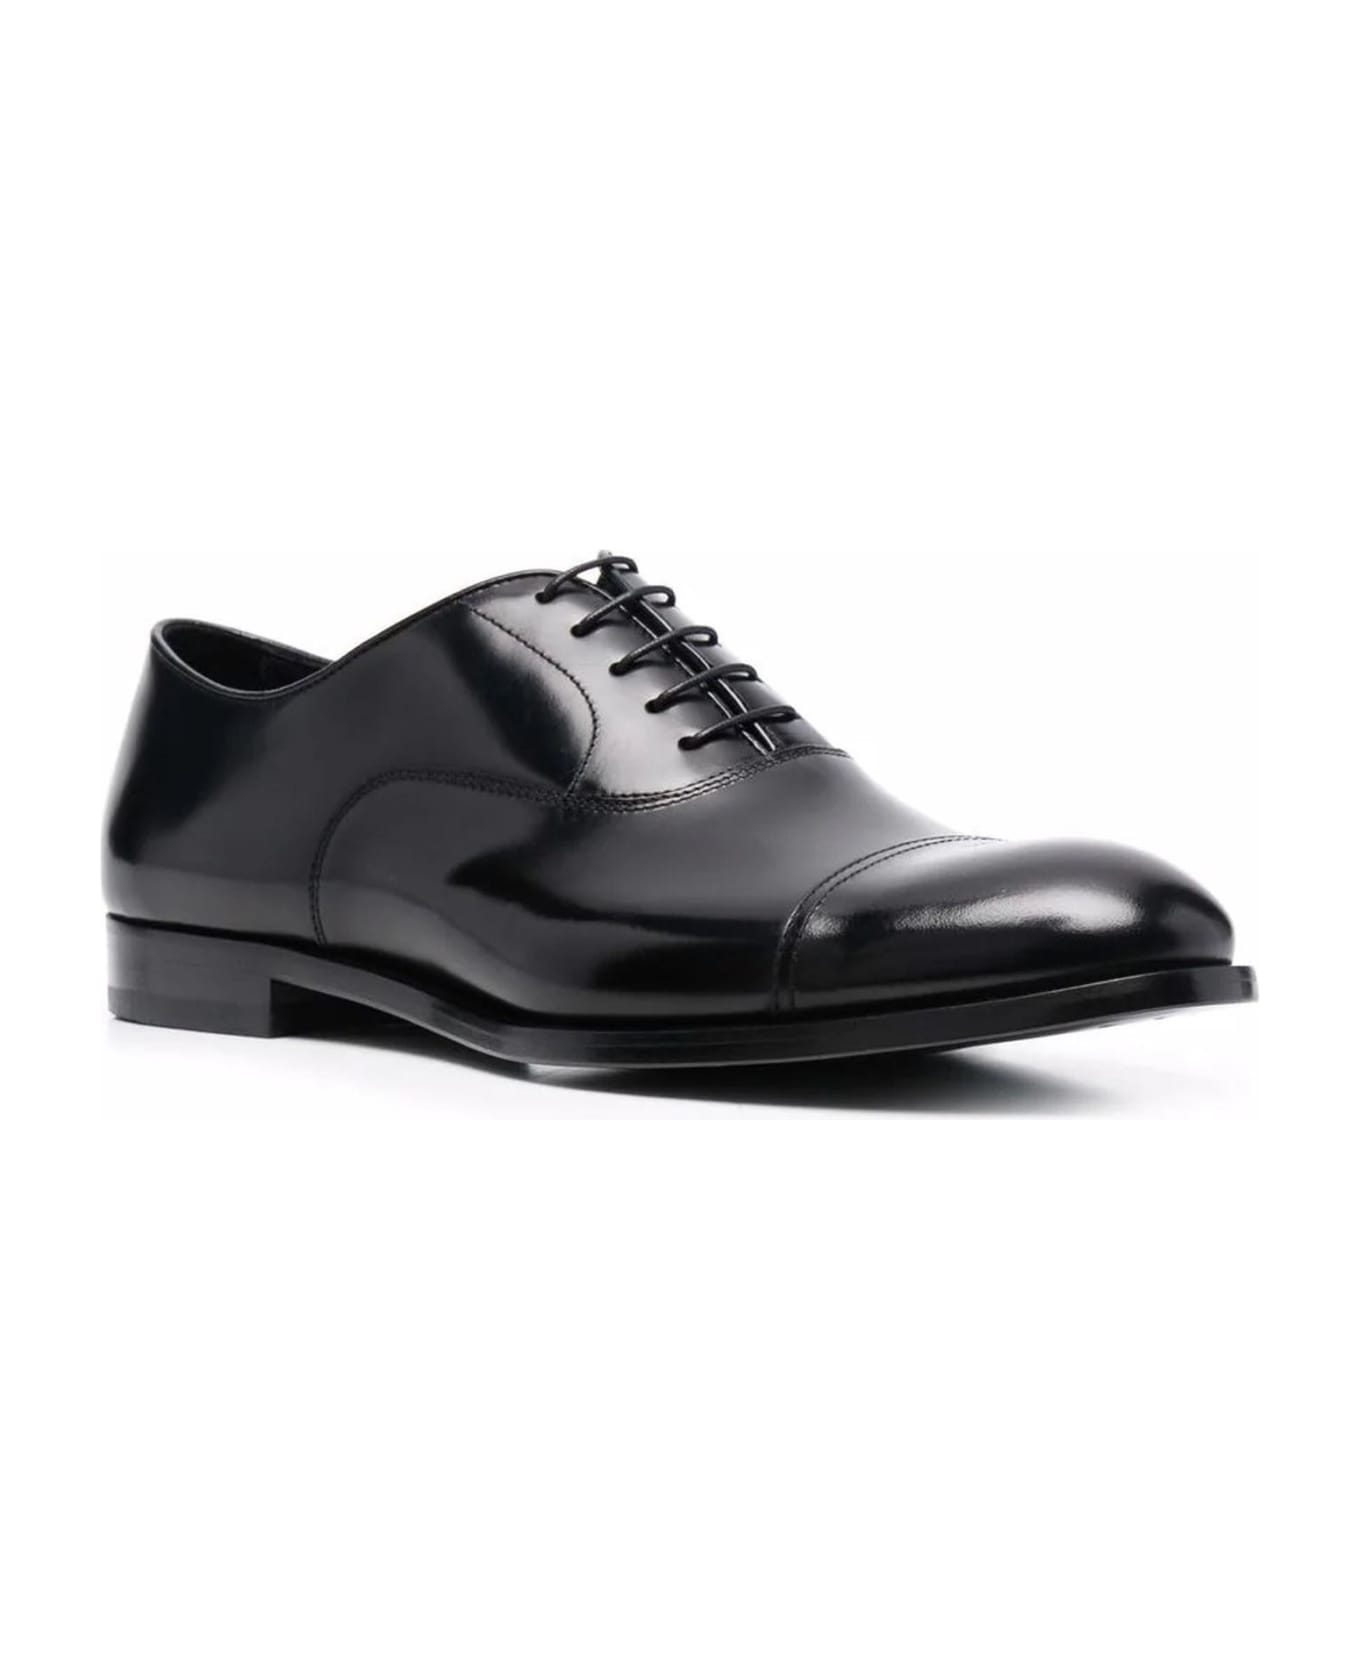 Doucal's Black Leather Lace Up Oxford Shoes - Black ローファー＆デッキシューズ